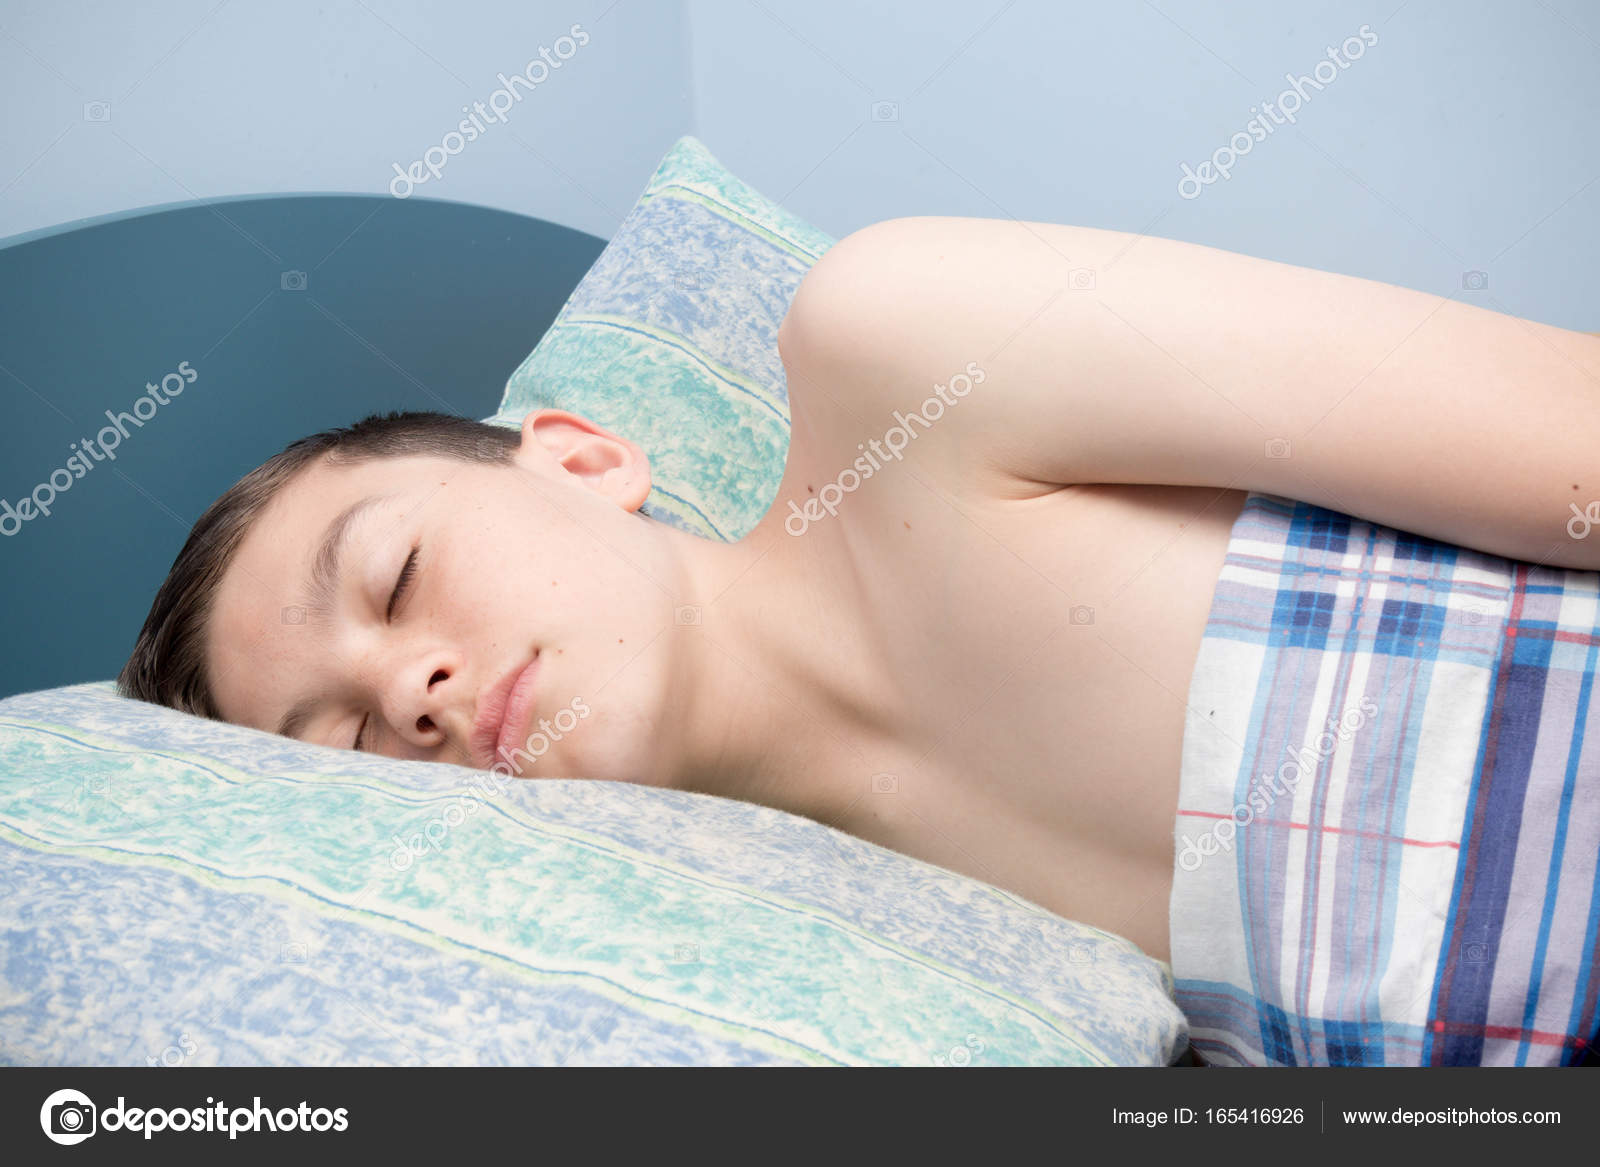 Teen boy waking up in a bed